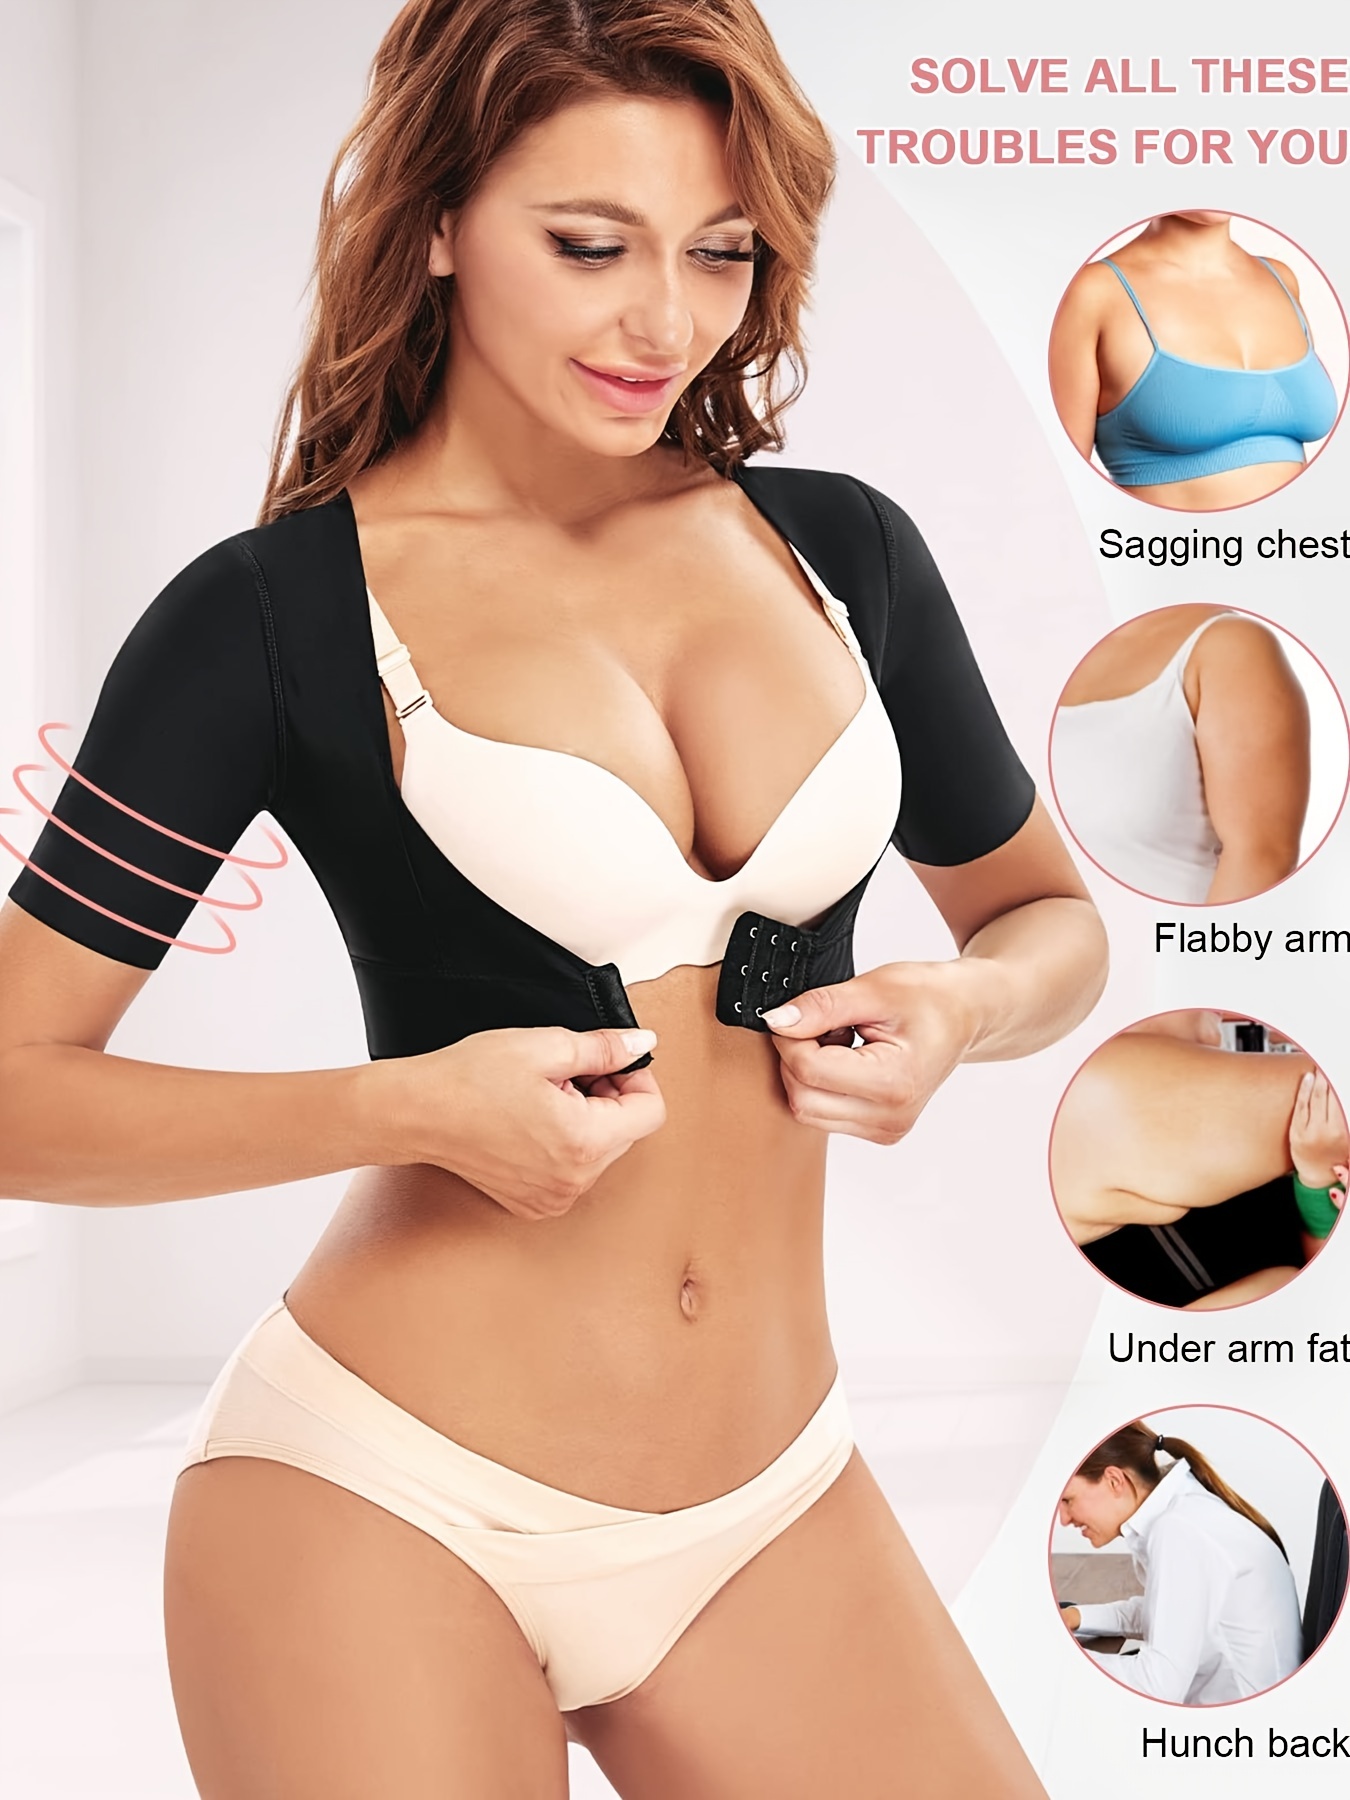 Upper Arm Shaper Post Surgical Slimmer Compression Sleeves Posture  Corrector Tops Shapewear for Women, Black(with Strap), XL : Buy Online at  Best Price in KSA - Souq is now : Fashion